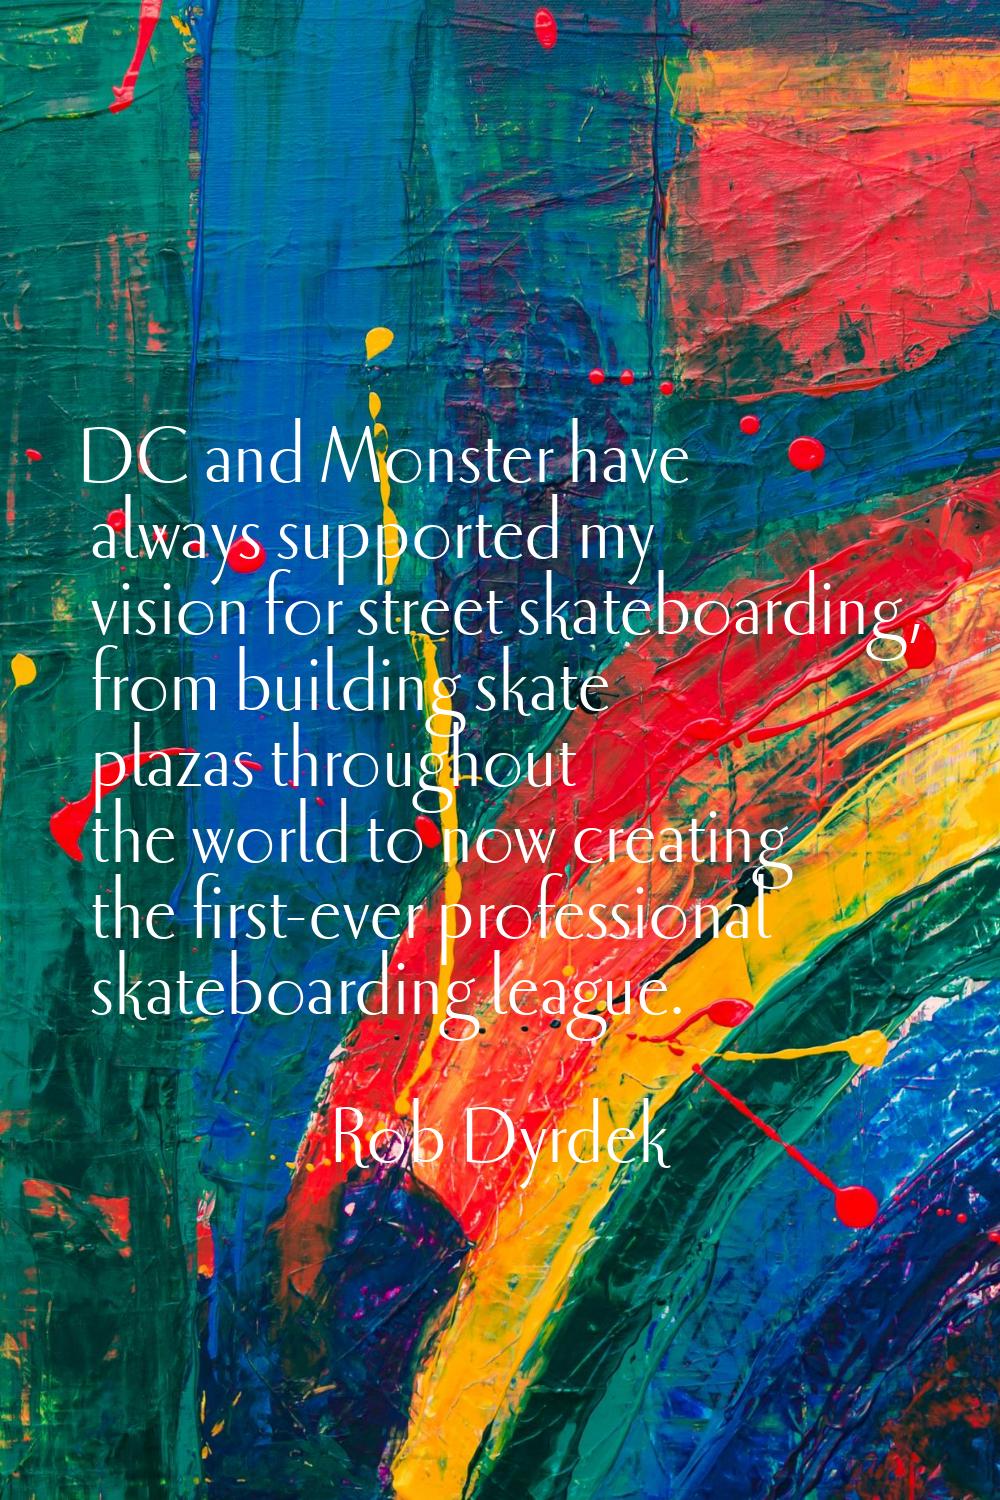 DC and Monster have always supported my vision for street skateboarding, from building skate plazas